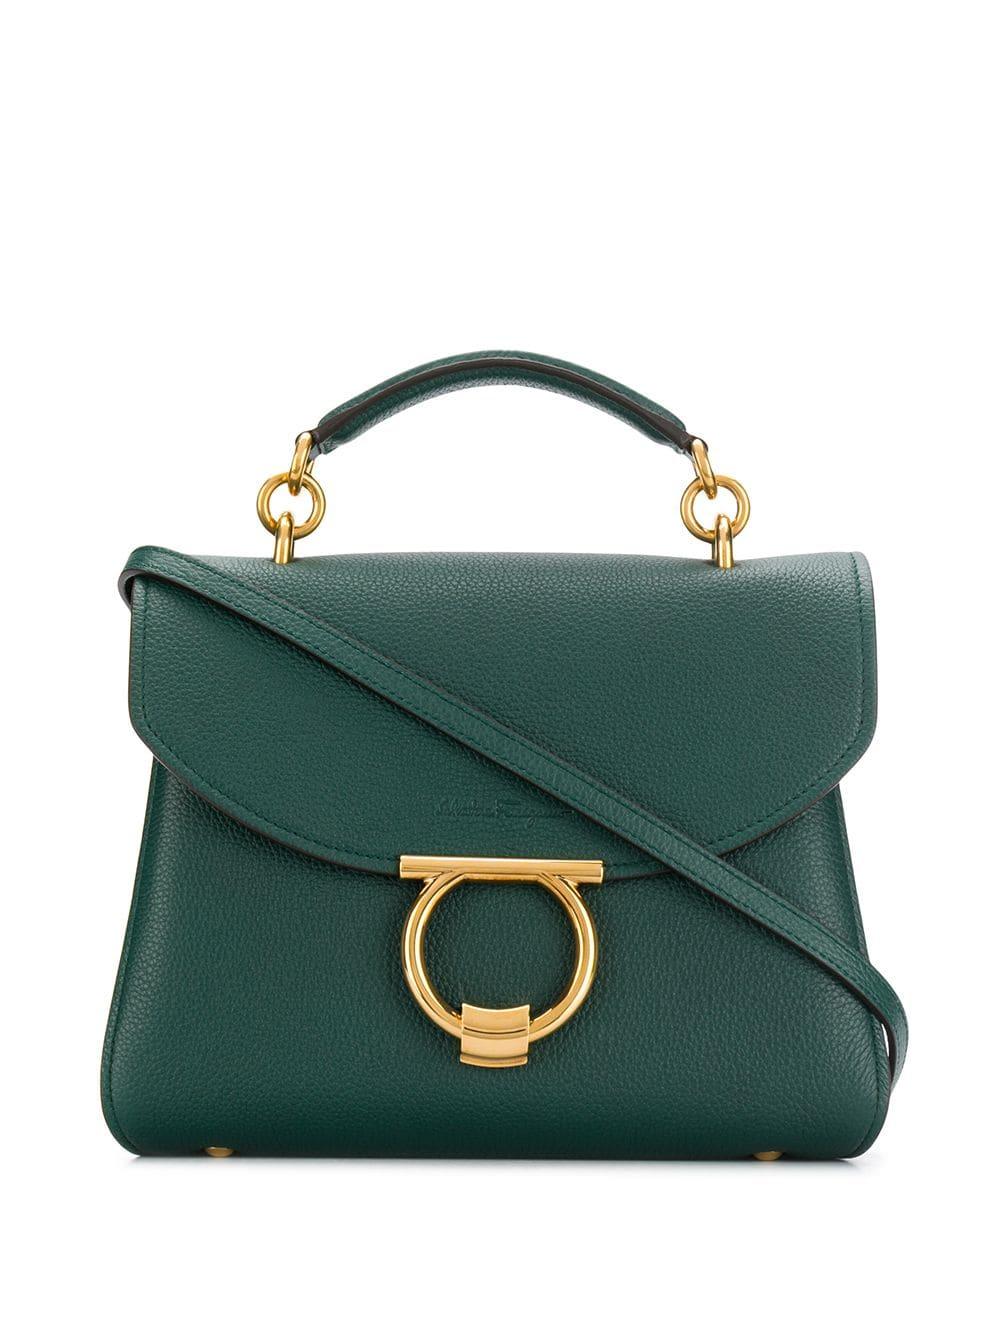 Ferragamo Small Margot Leather Top Handle Bag in Green - Save 20% - Lyst